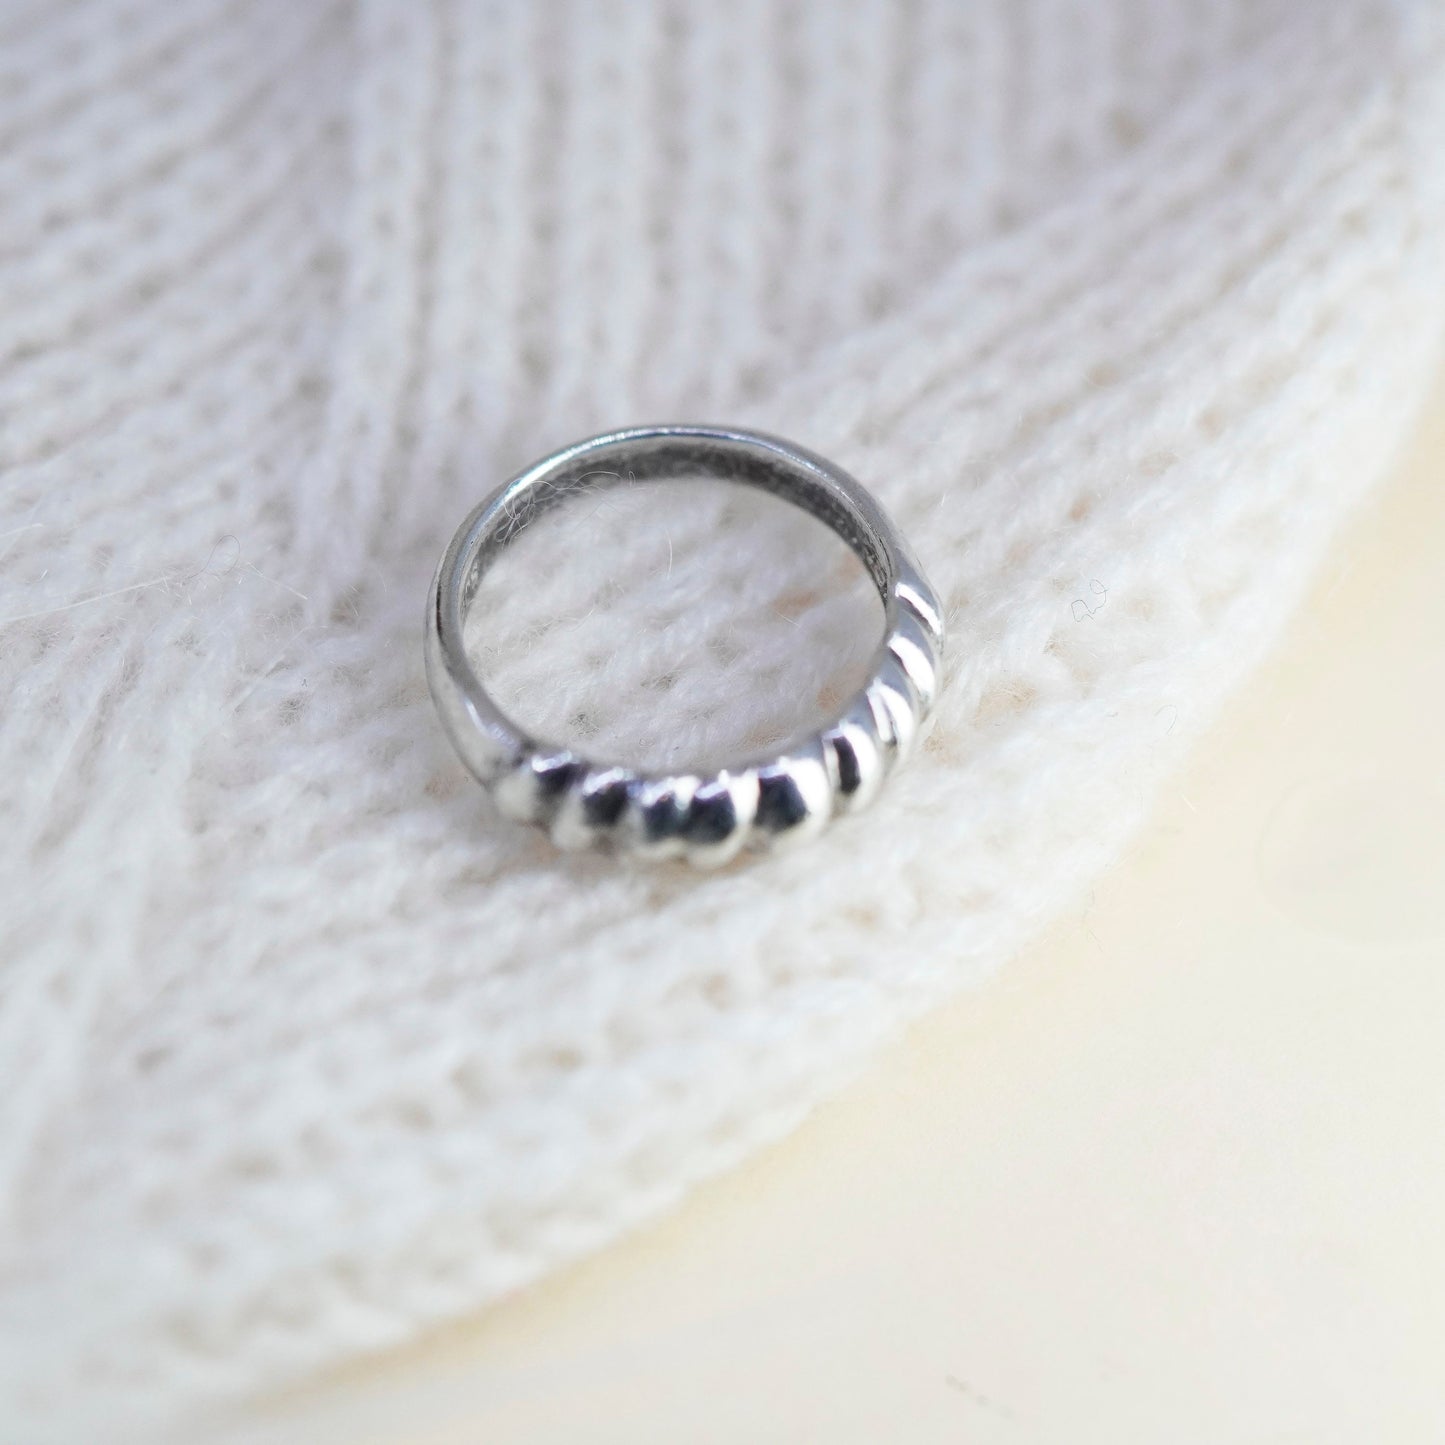 Size 7, vintage Sterling silver handmade ring, stackable 925 ribbed band